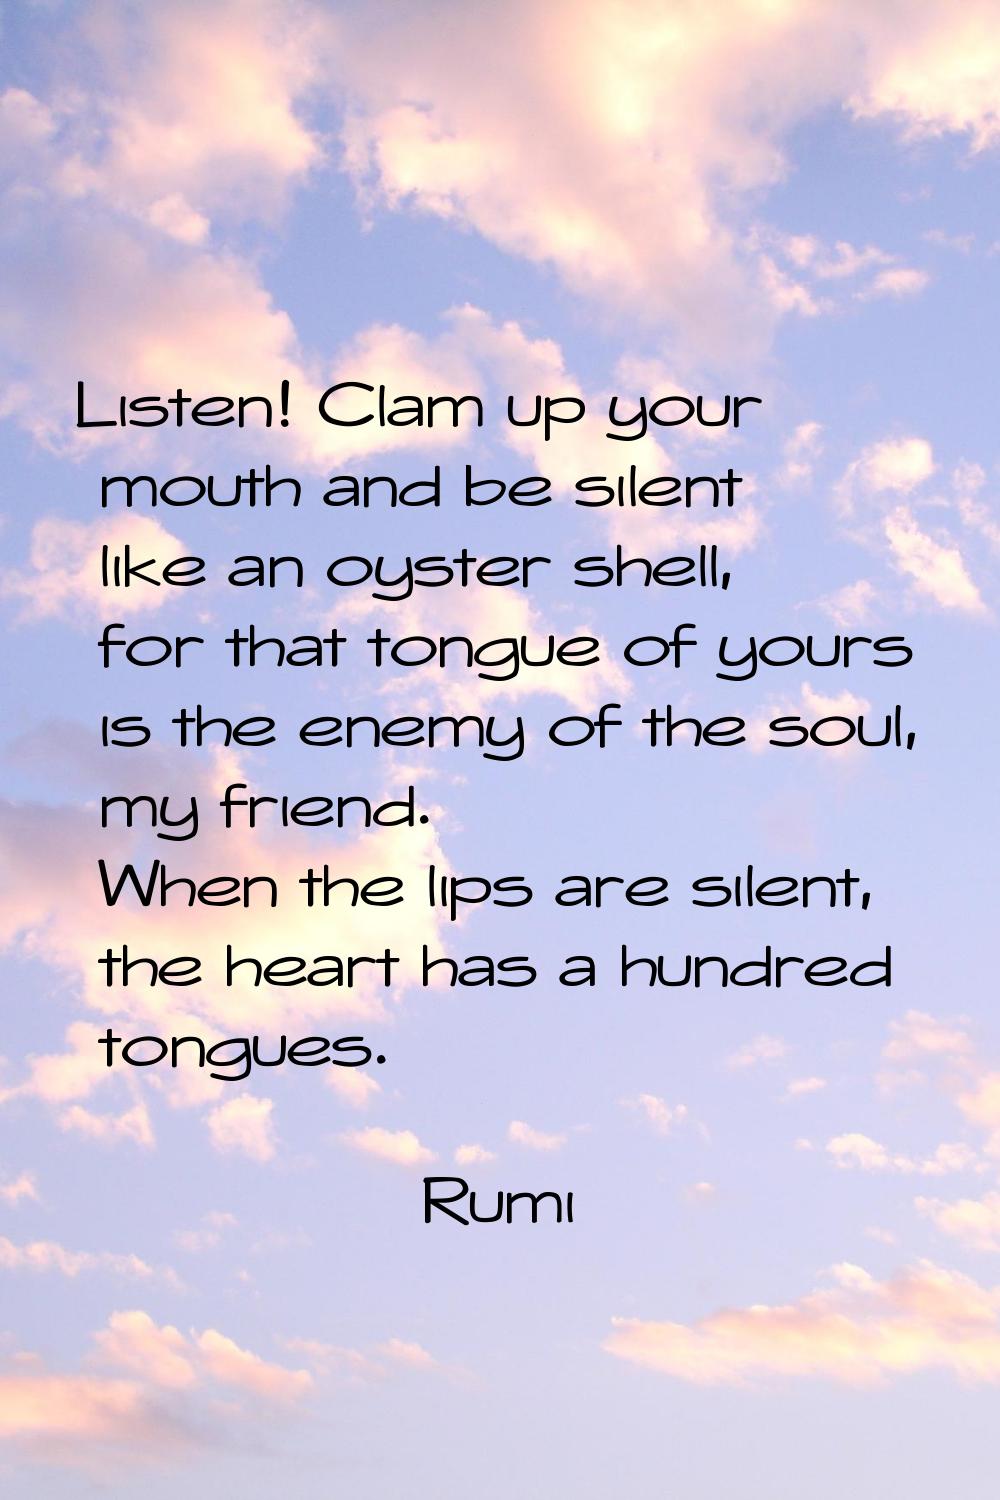 Listen! Clam up your mouth and be silent like an oyster shell, for that tongue of yours is the enem